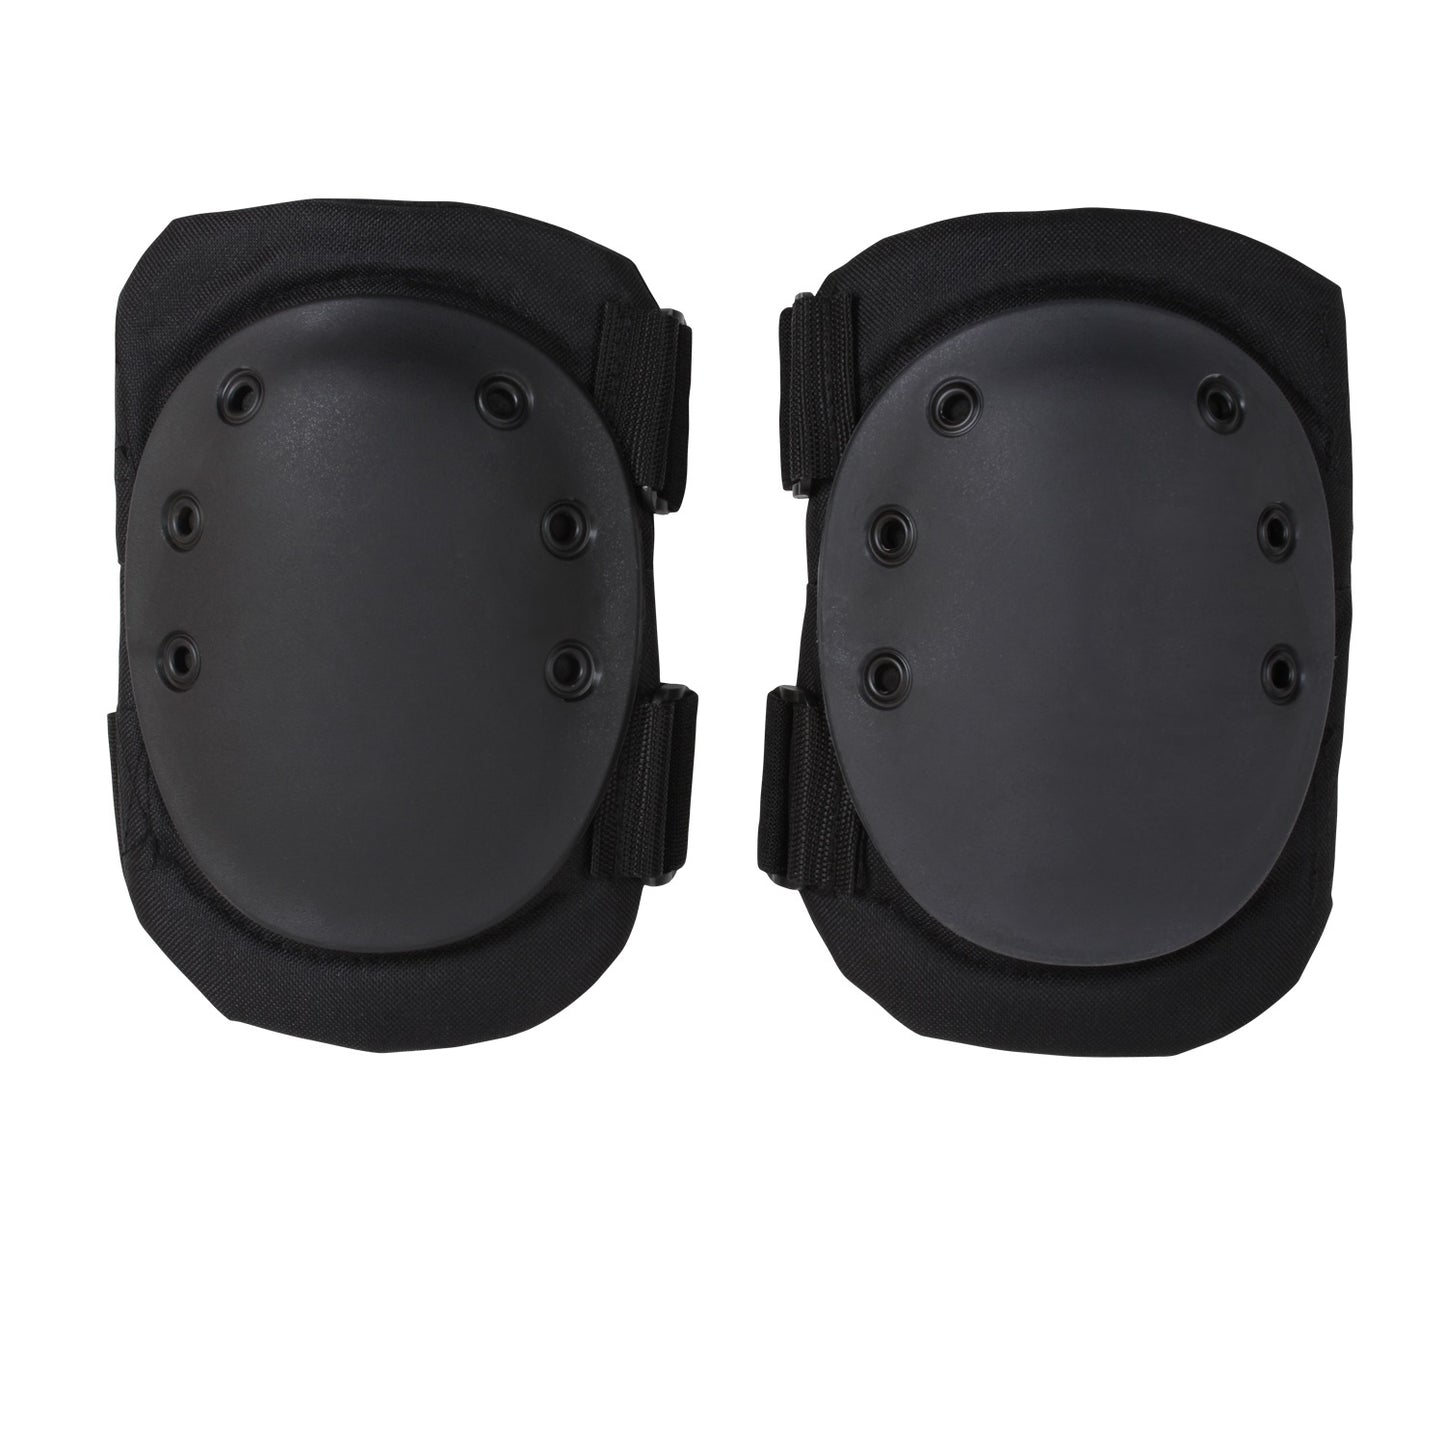 11058 - Tactical Protective Gear Knee Pads